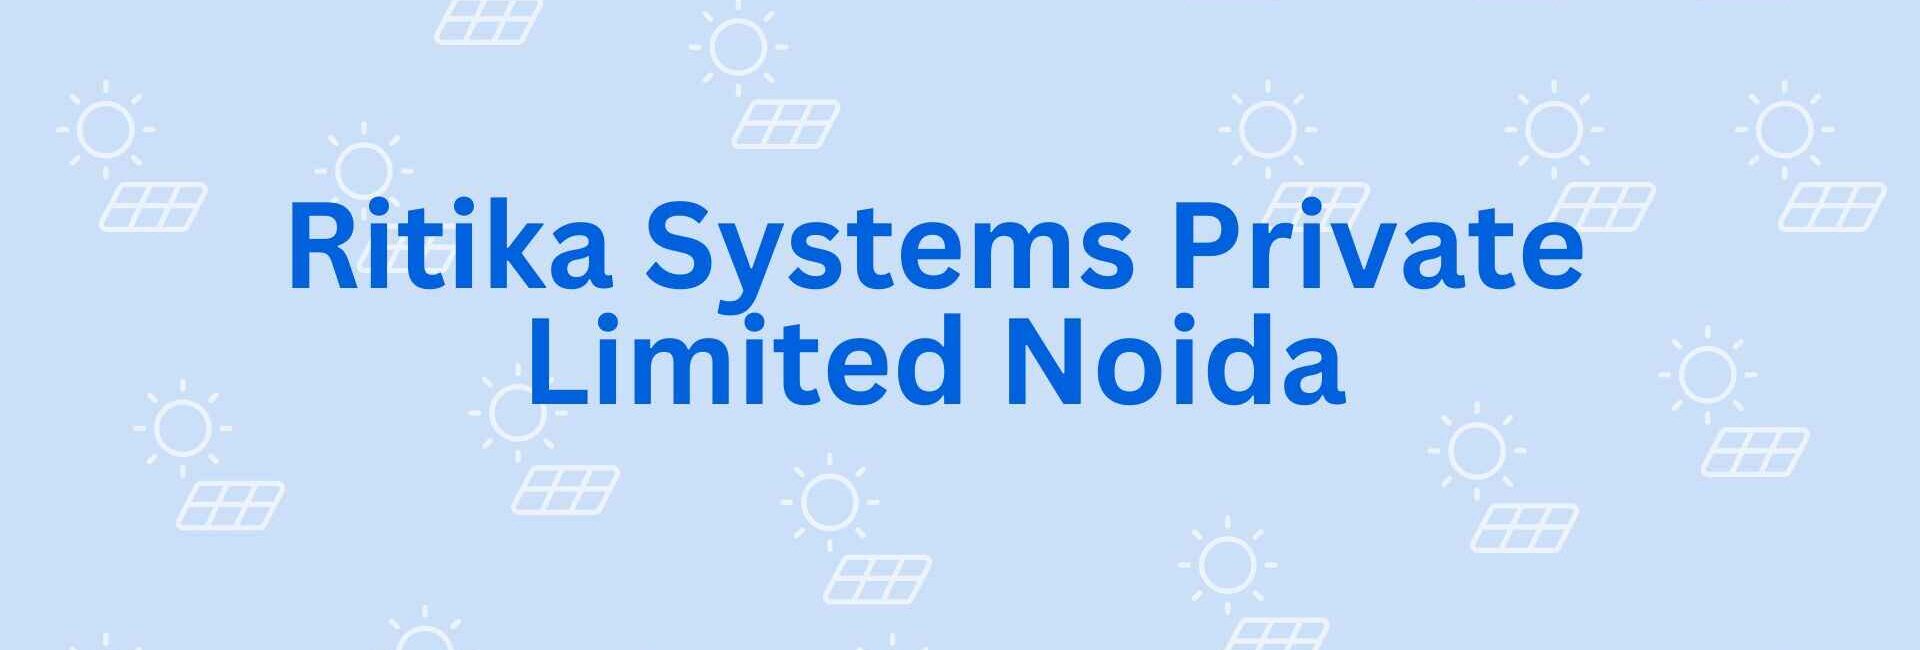 Ritika Systems Private Limited Noida - Solar Power System in Noida